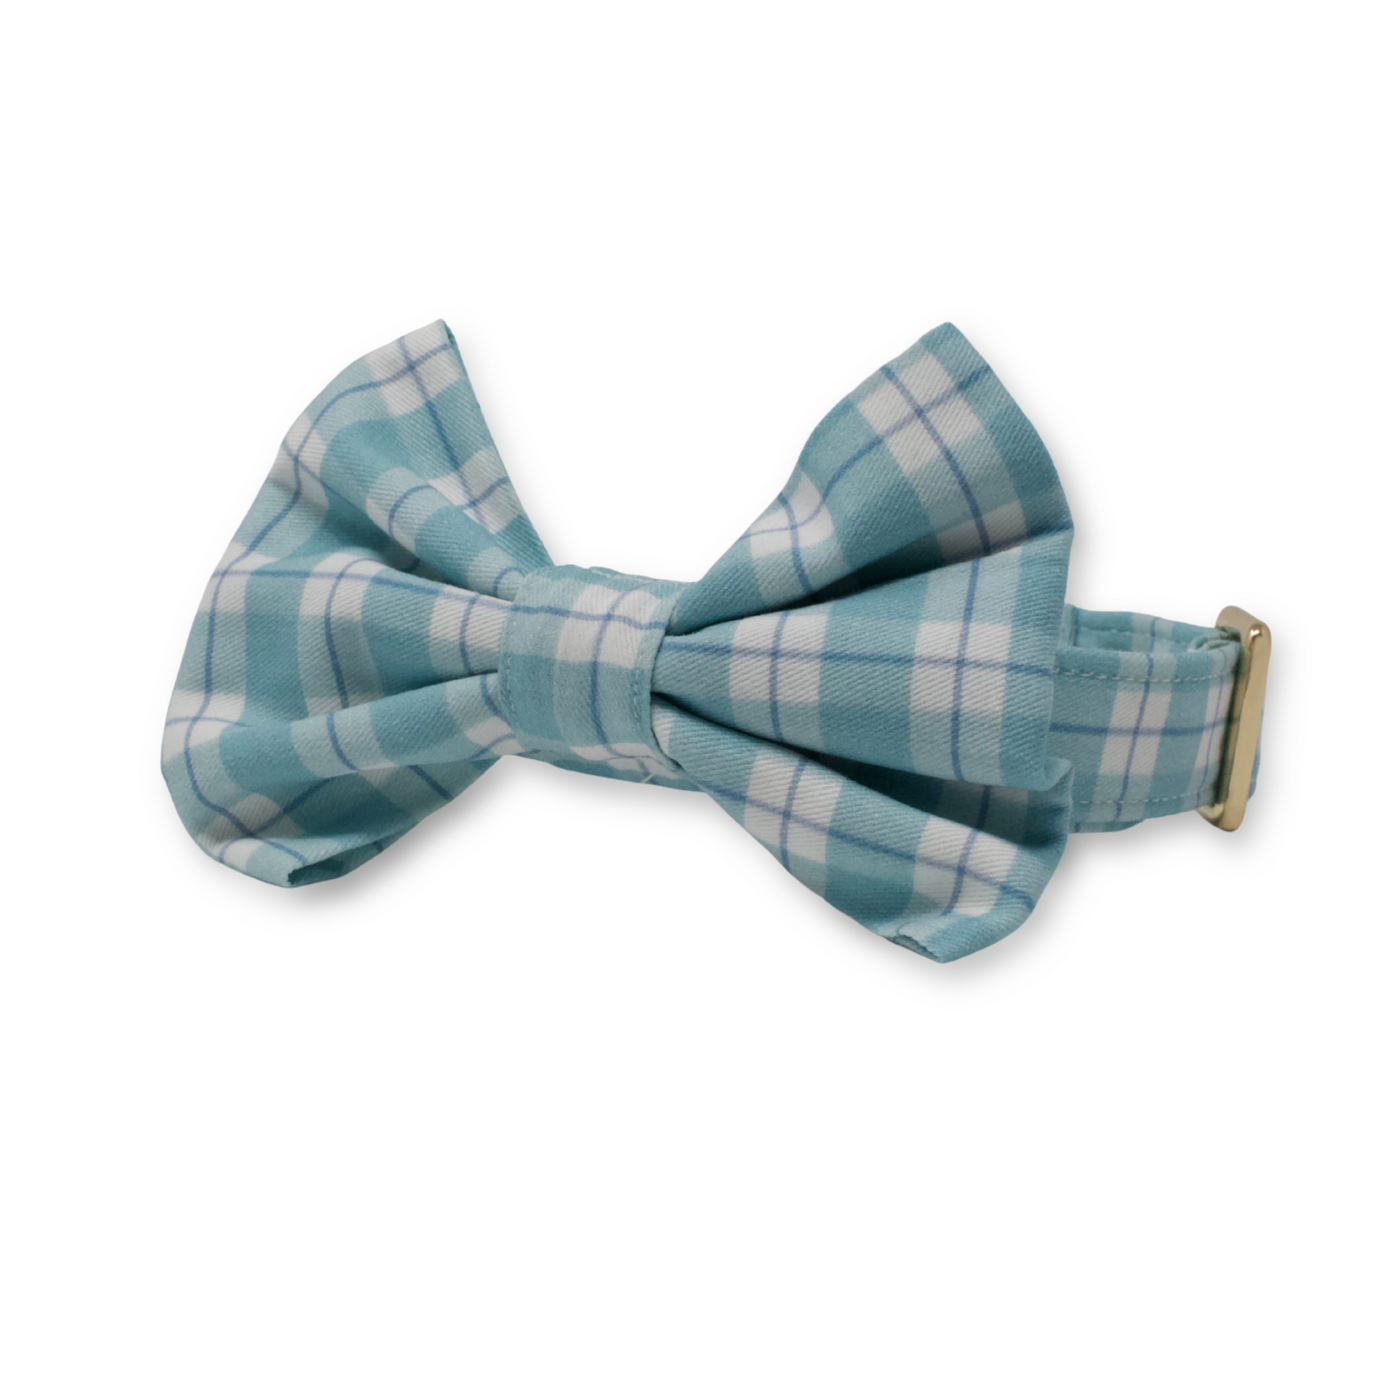 Dog collar and bow tie in aqua and blue blue plaid